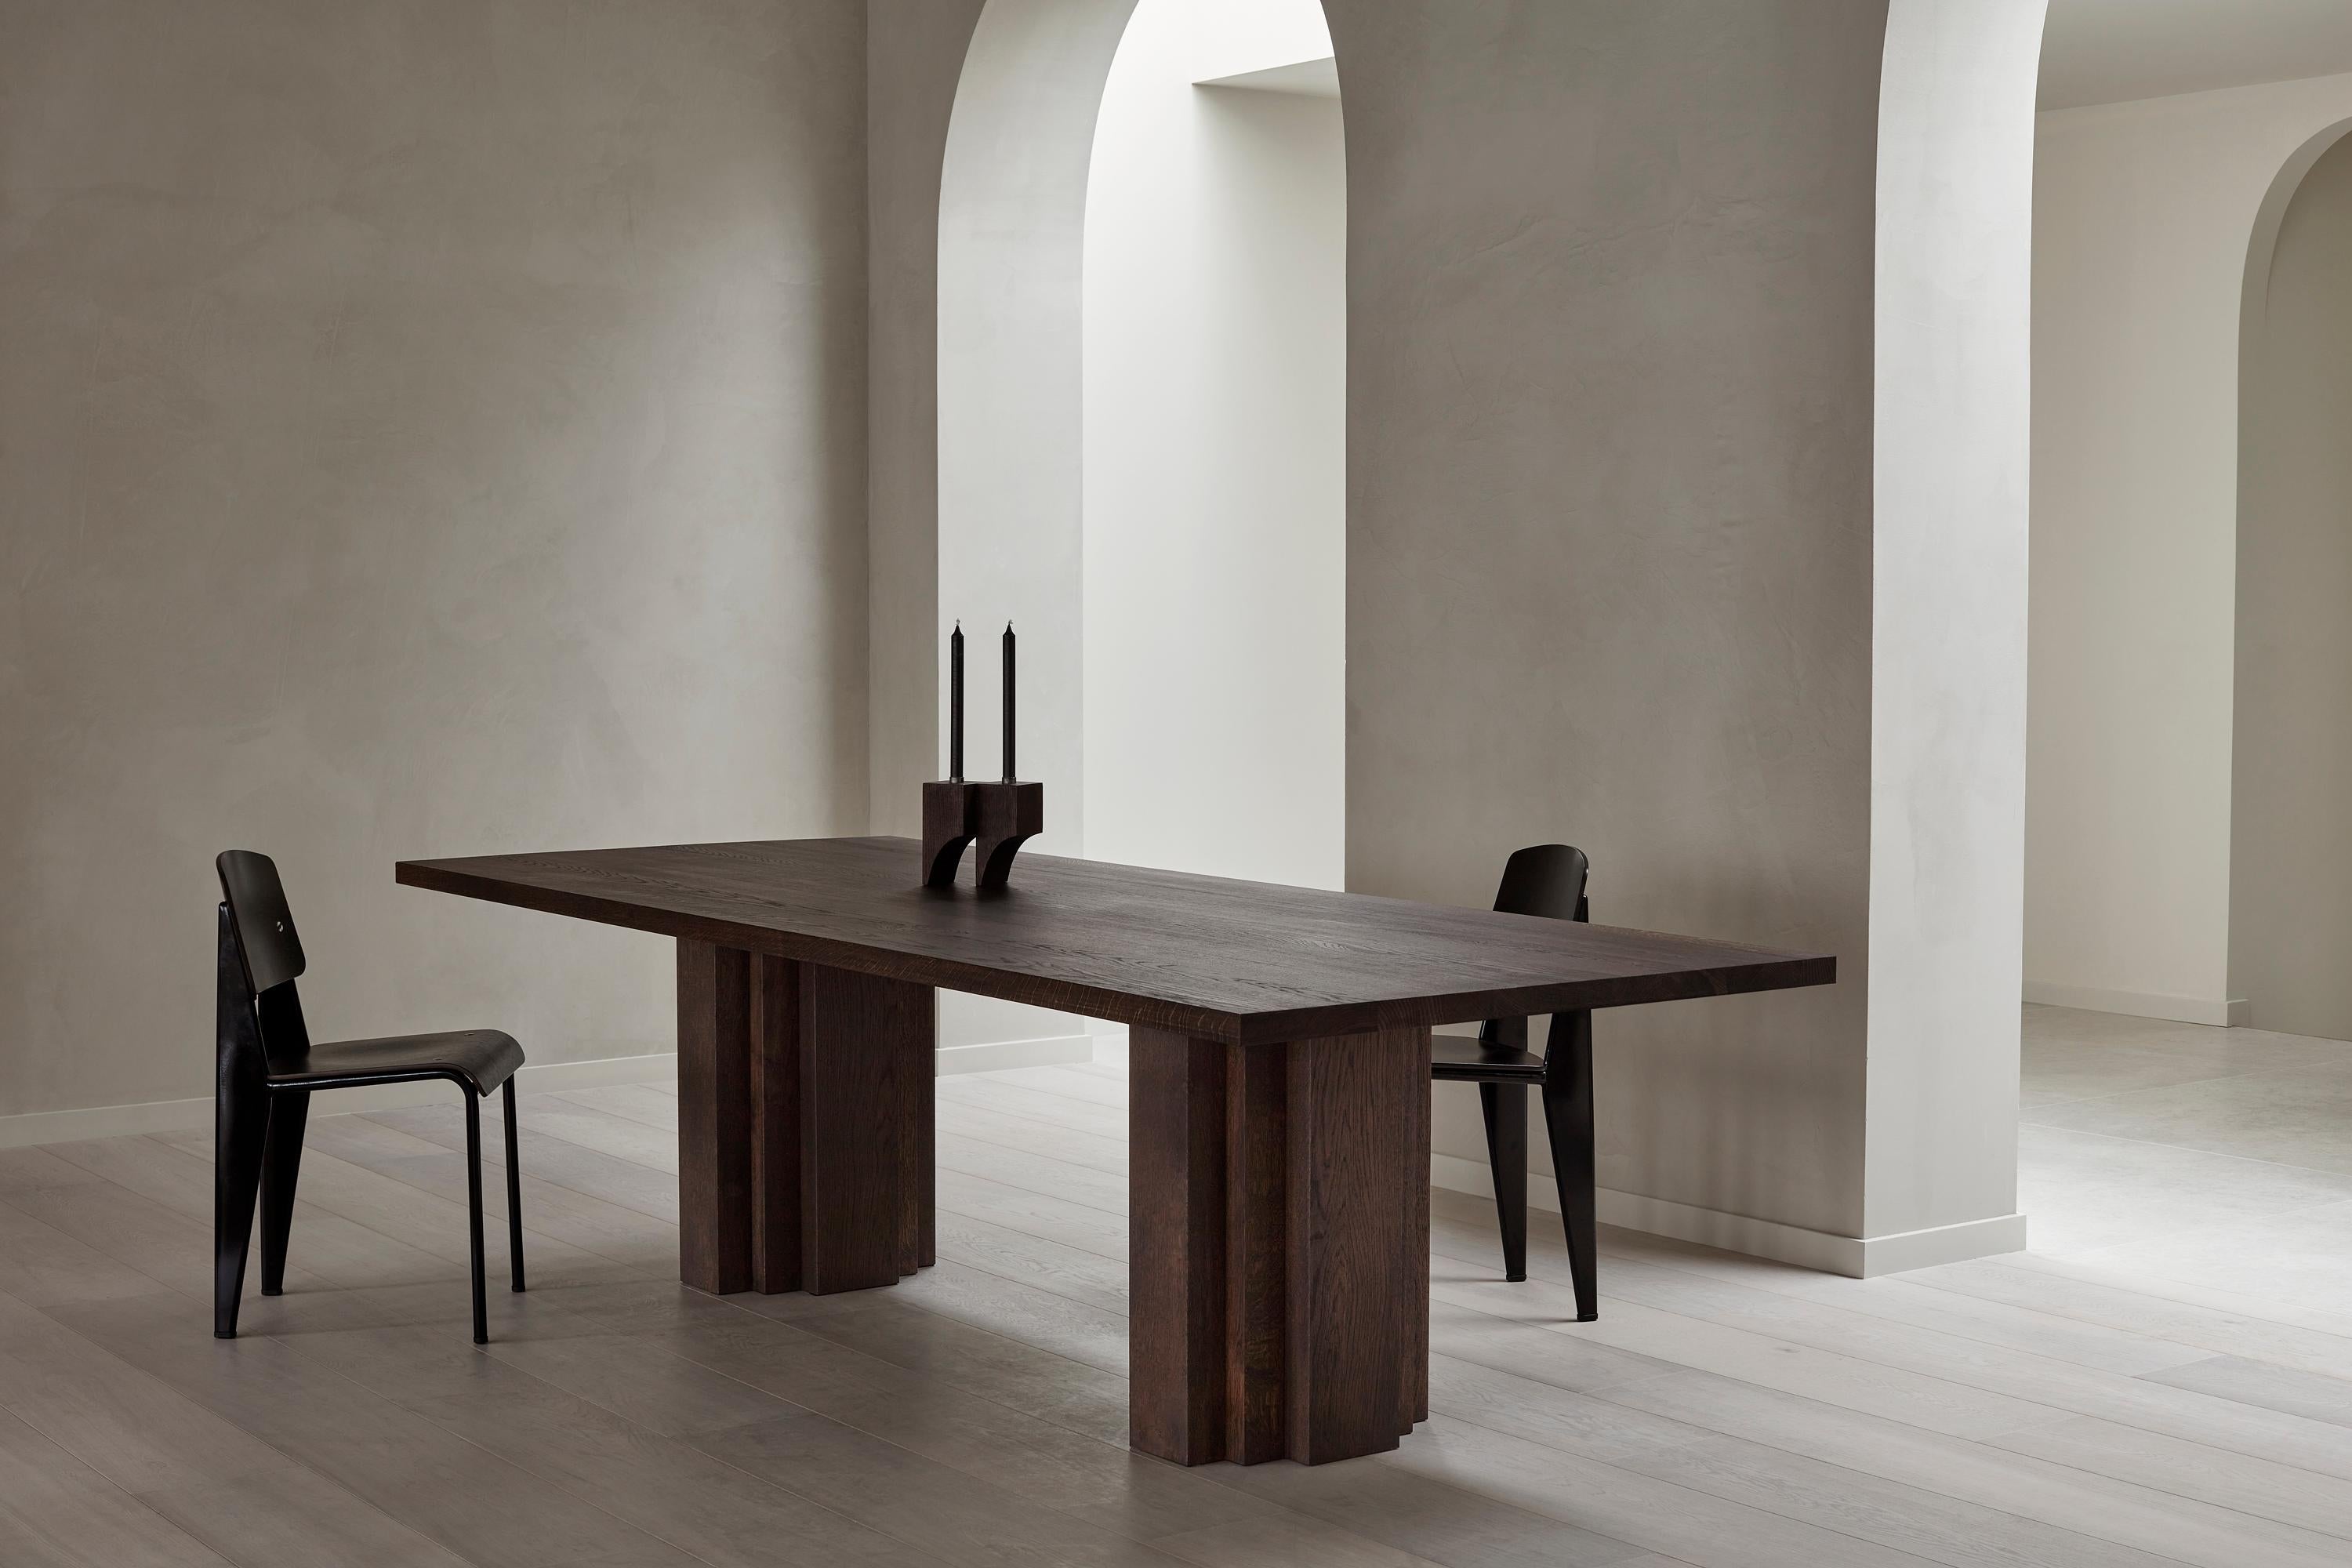 The Brut Table takes cues from Brutalism and Amsterdam School architecture. Voluminous columns with a monumental aesthetic support the heavy table top. The table is designed by Aad Bos and crafted in the Netherlands.

Mokko is an Amsterdam based